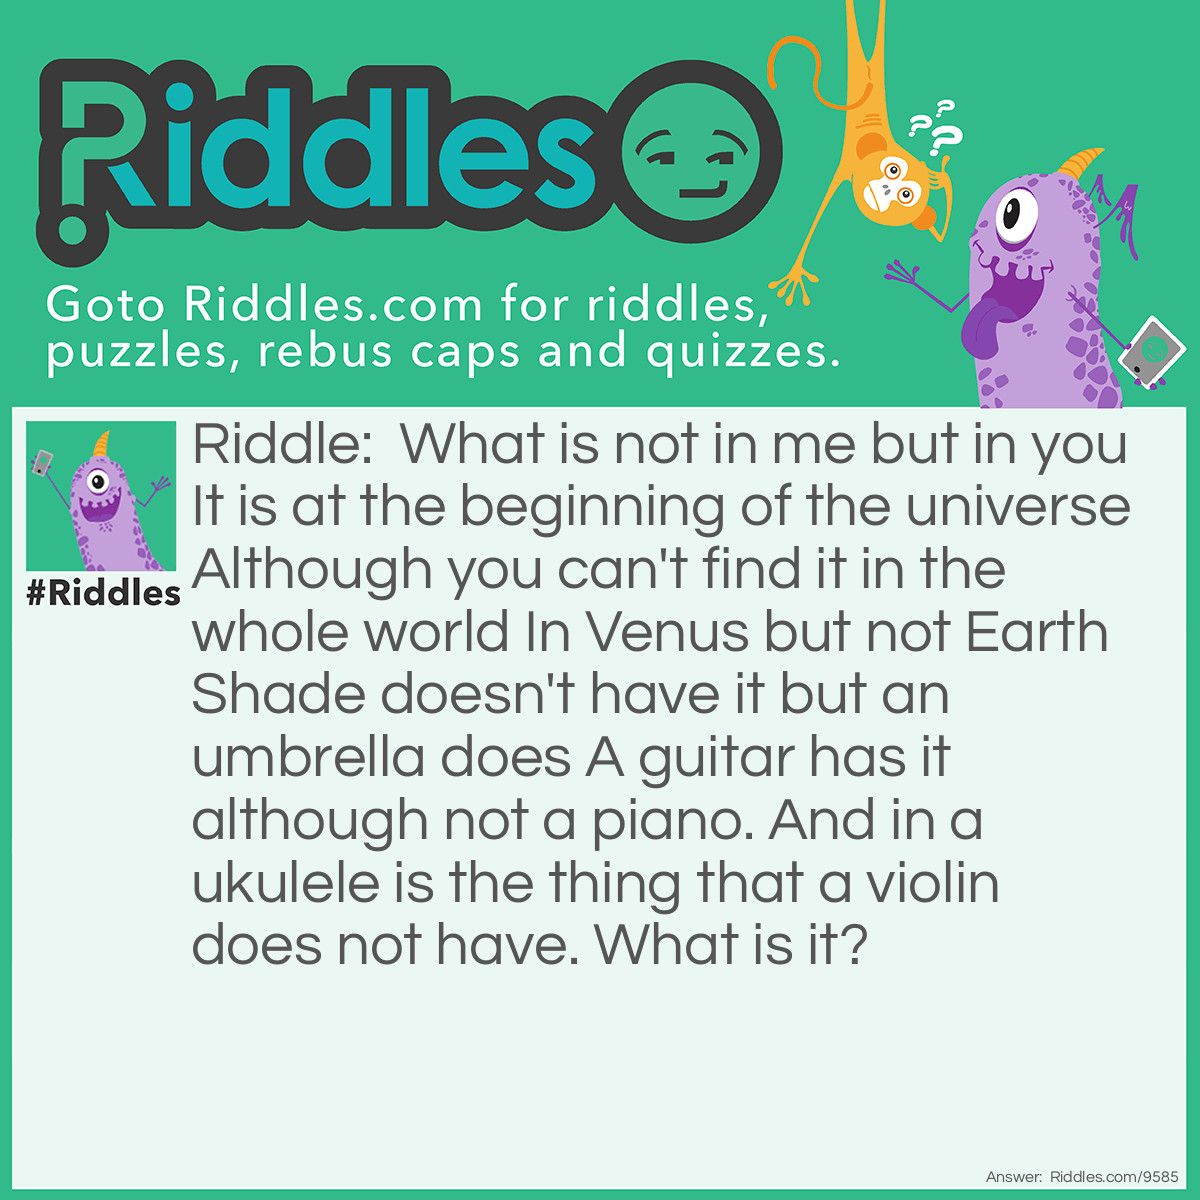 Riddle: What is not in me but in you It is at the beginning of the universe Although you can't find it in the whole world In Venus but not Earth Shade doesn't have it but an umbrella does A guitar has it although not a piano. And in a ukulele is the thing that a violin does not have. What is it? Answer: The letter U.